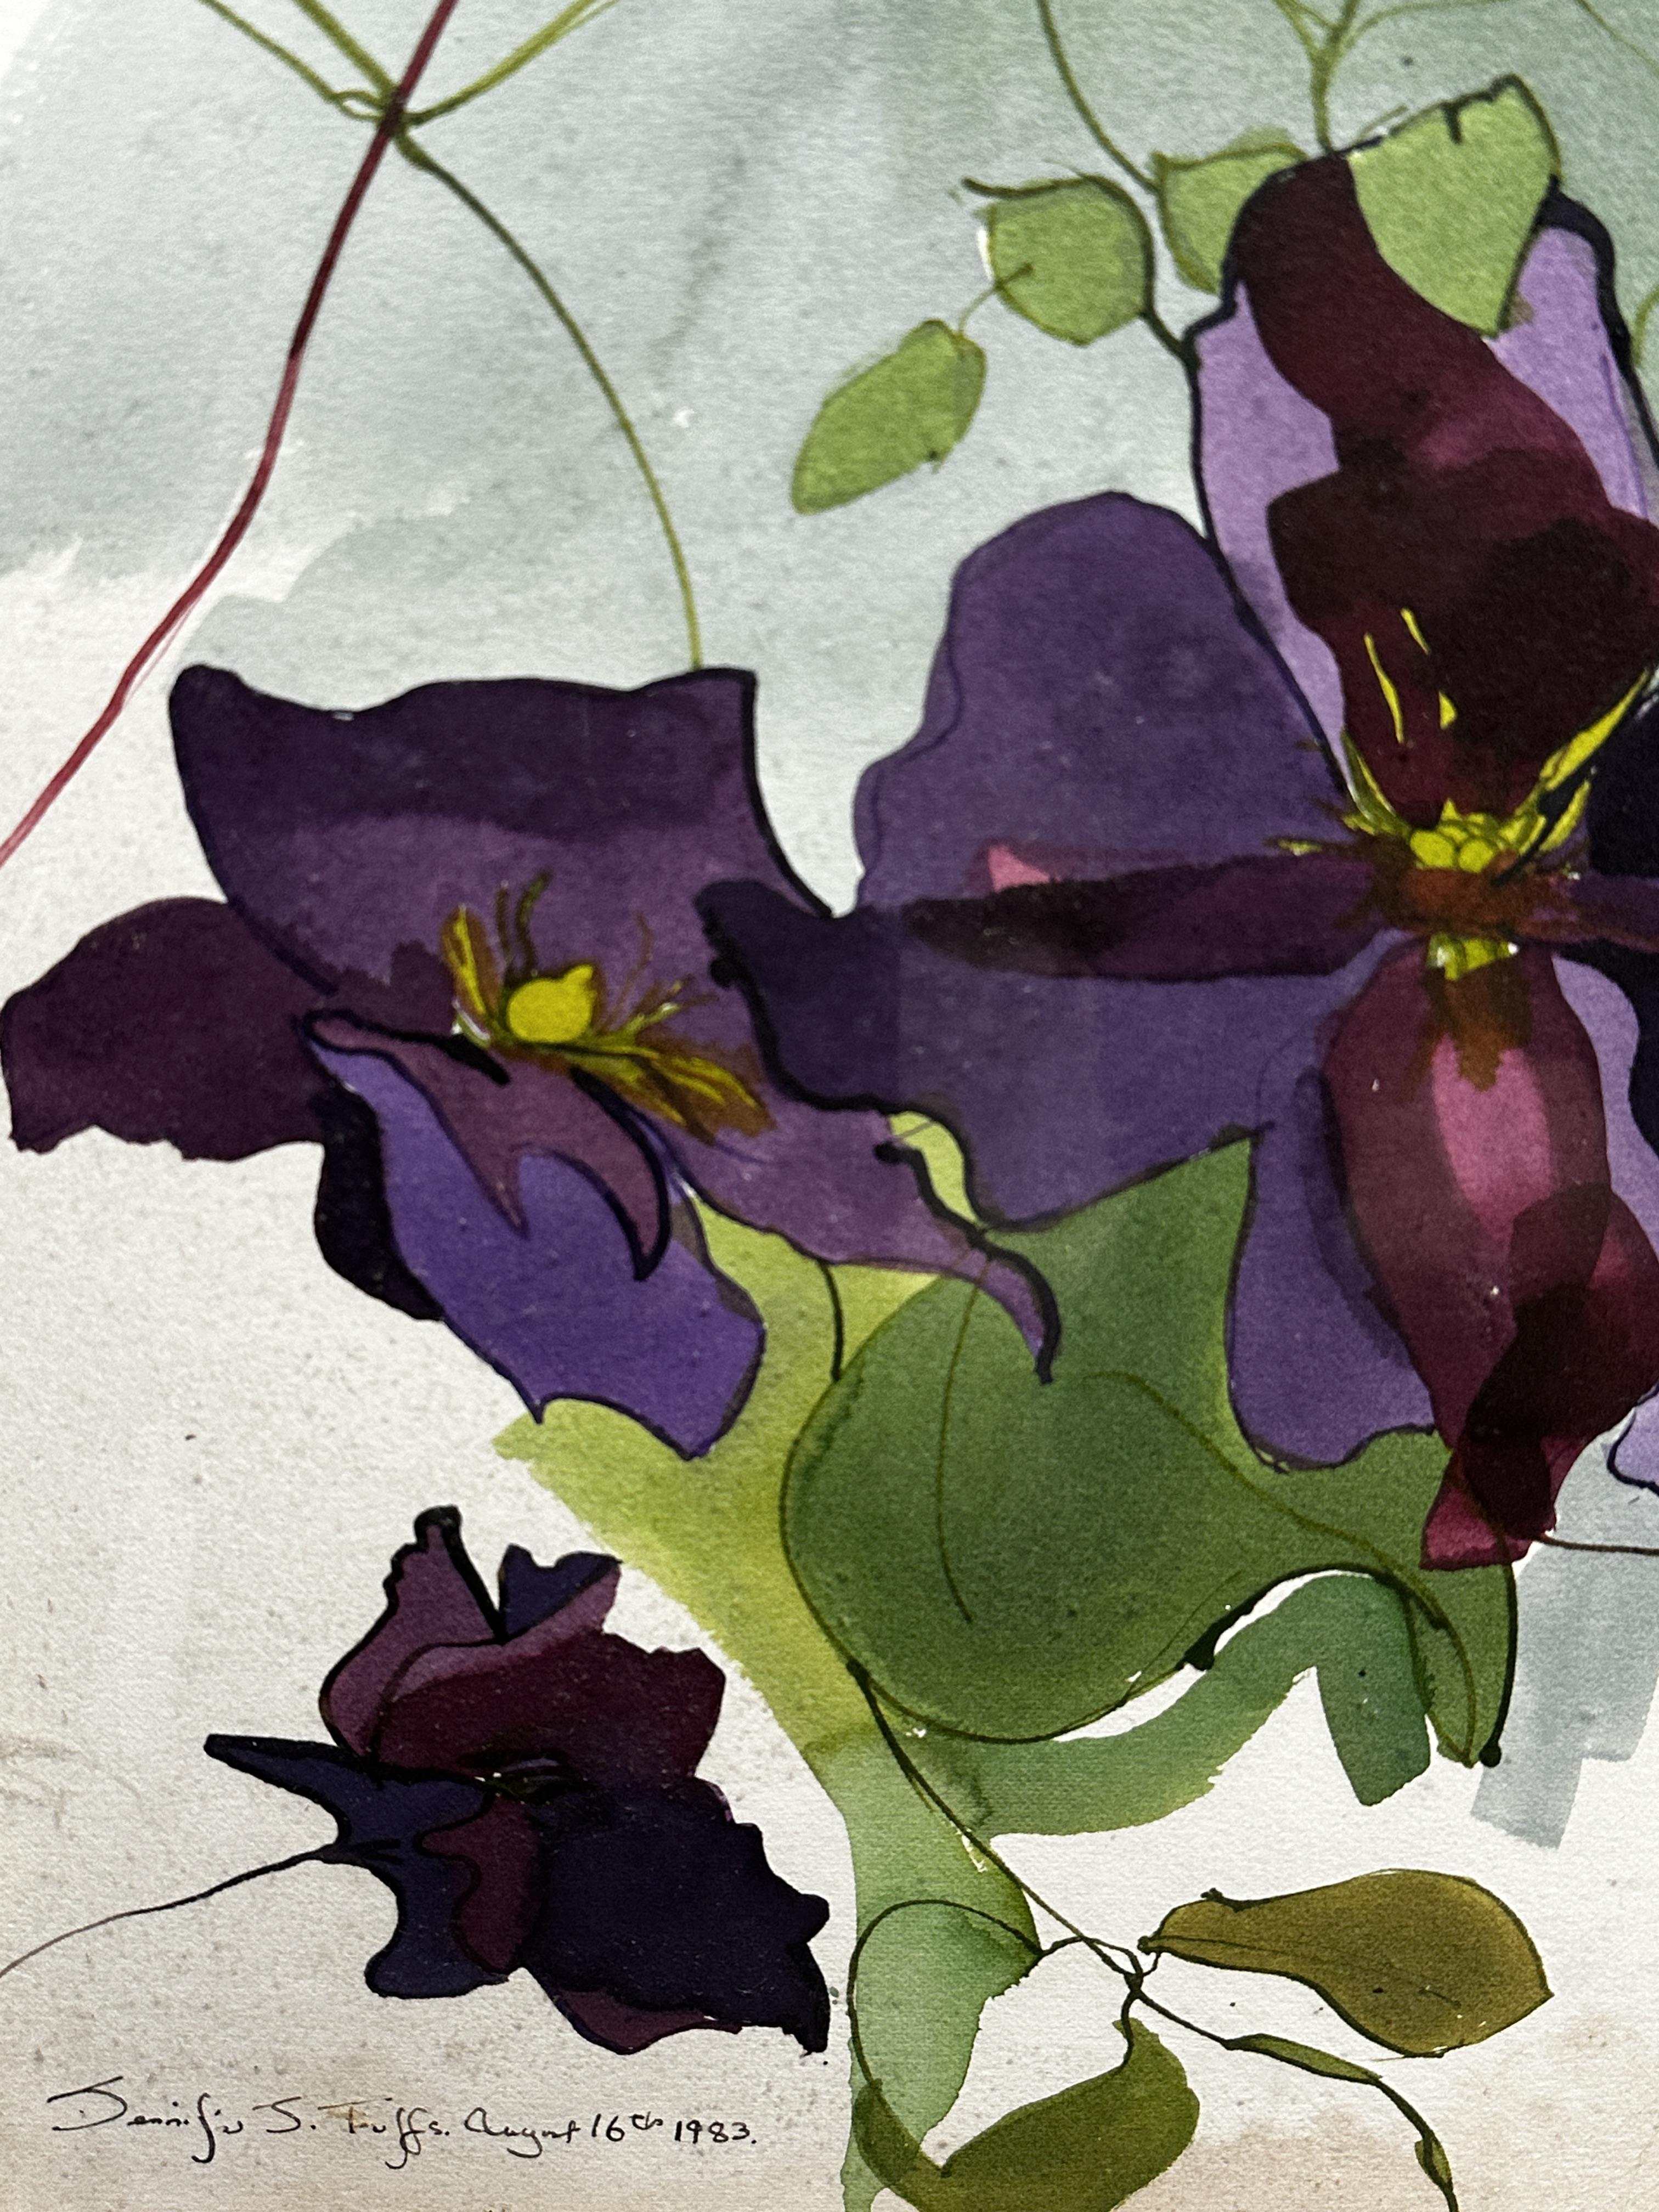 Jennifer S Tuffs, Clematis, pen and ink with watercolour on paper, dated August 16th 1983, glazed - Image 2 of 2